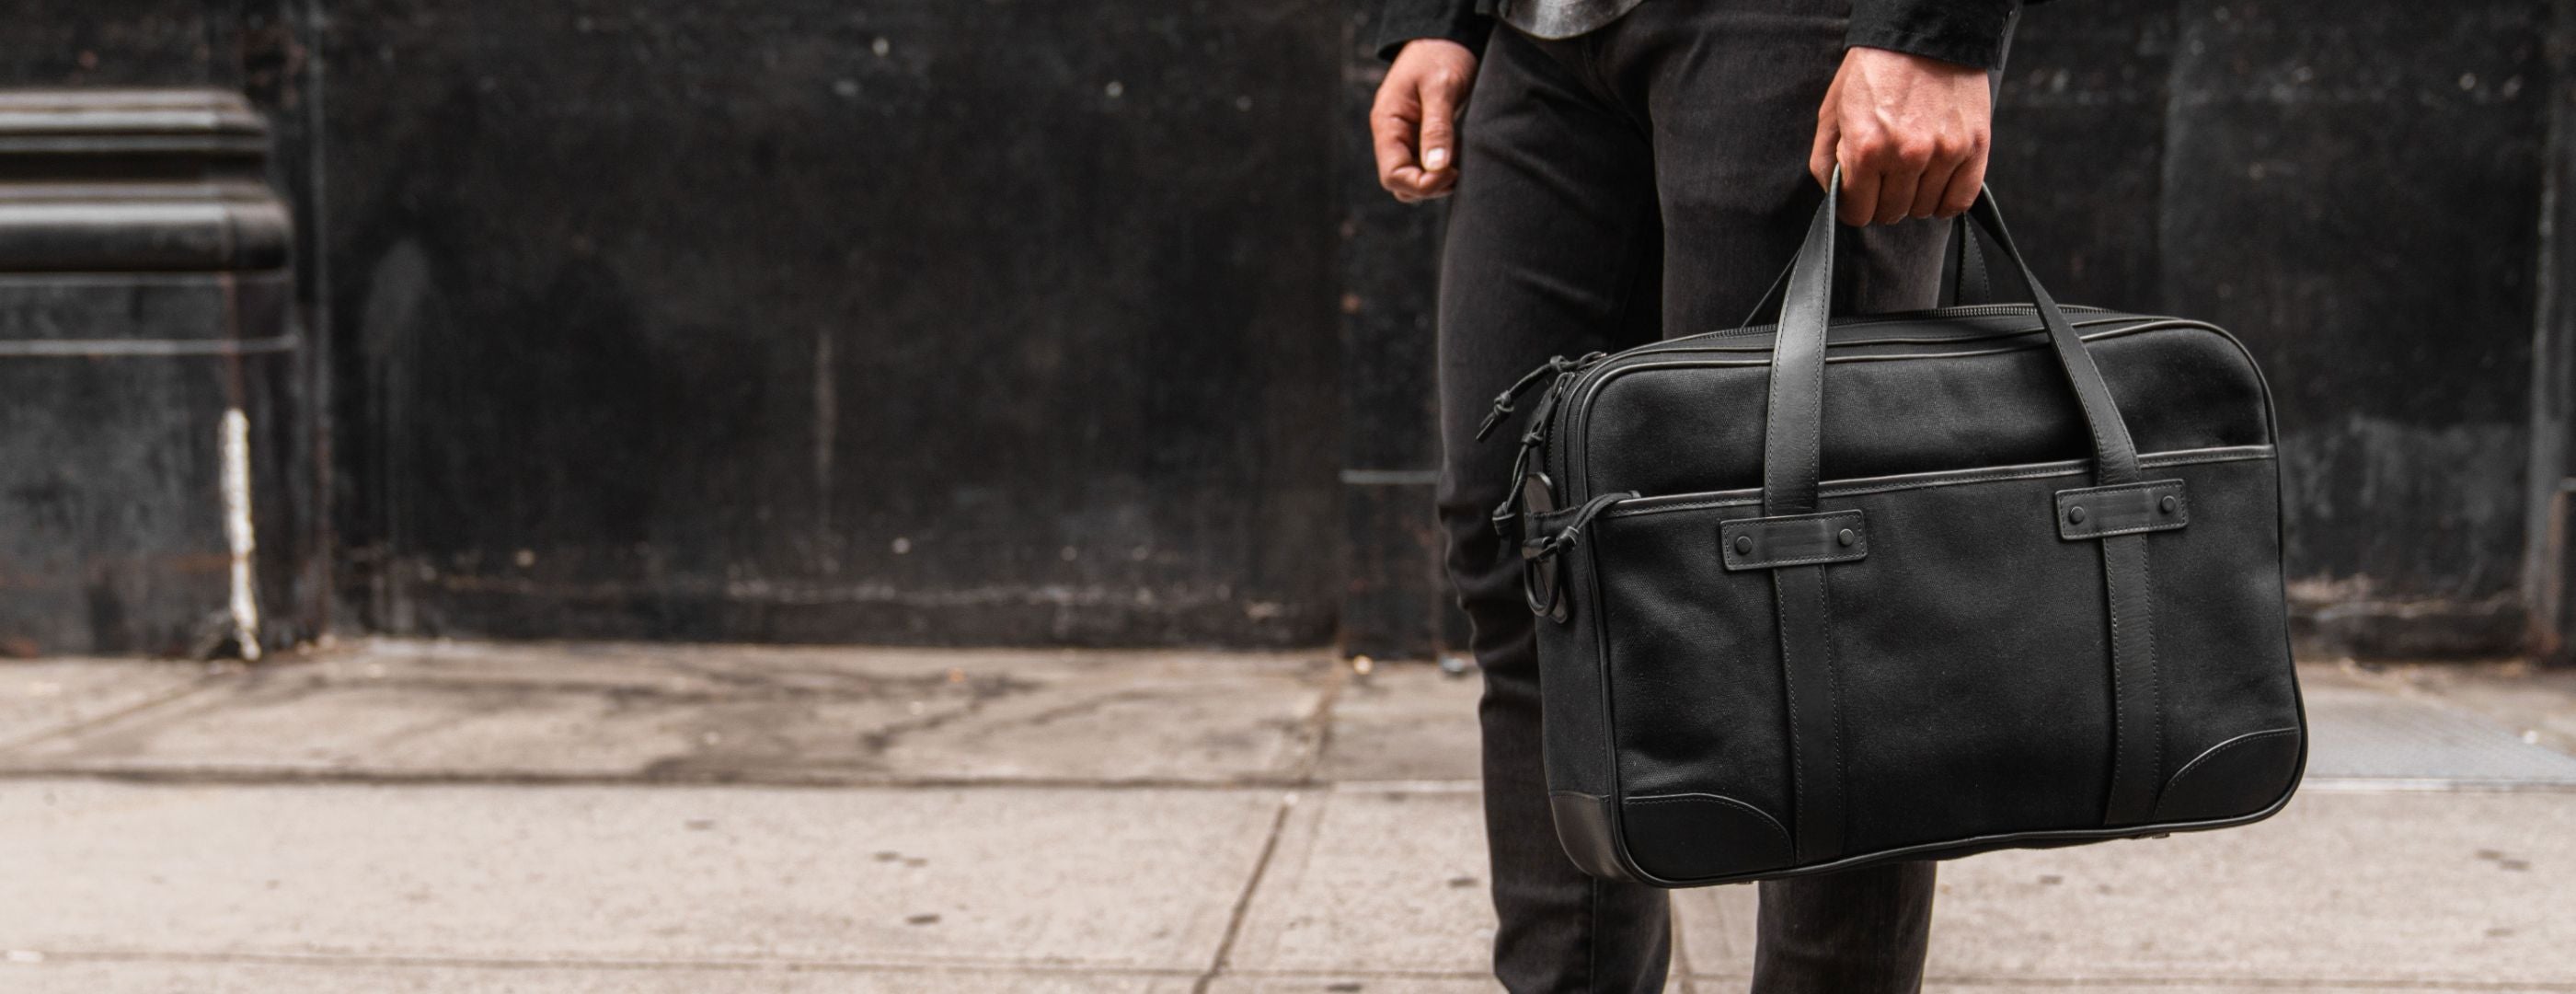 The Commuter Bag